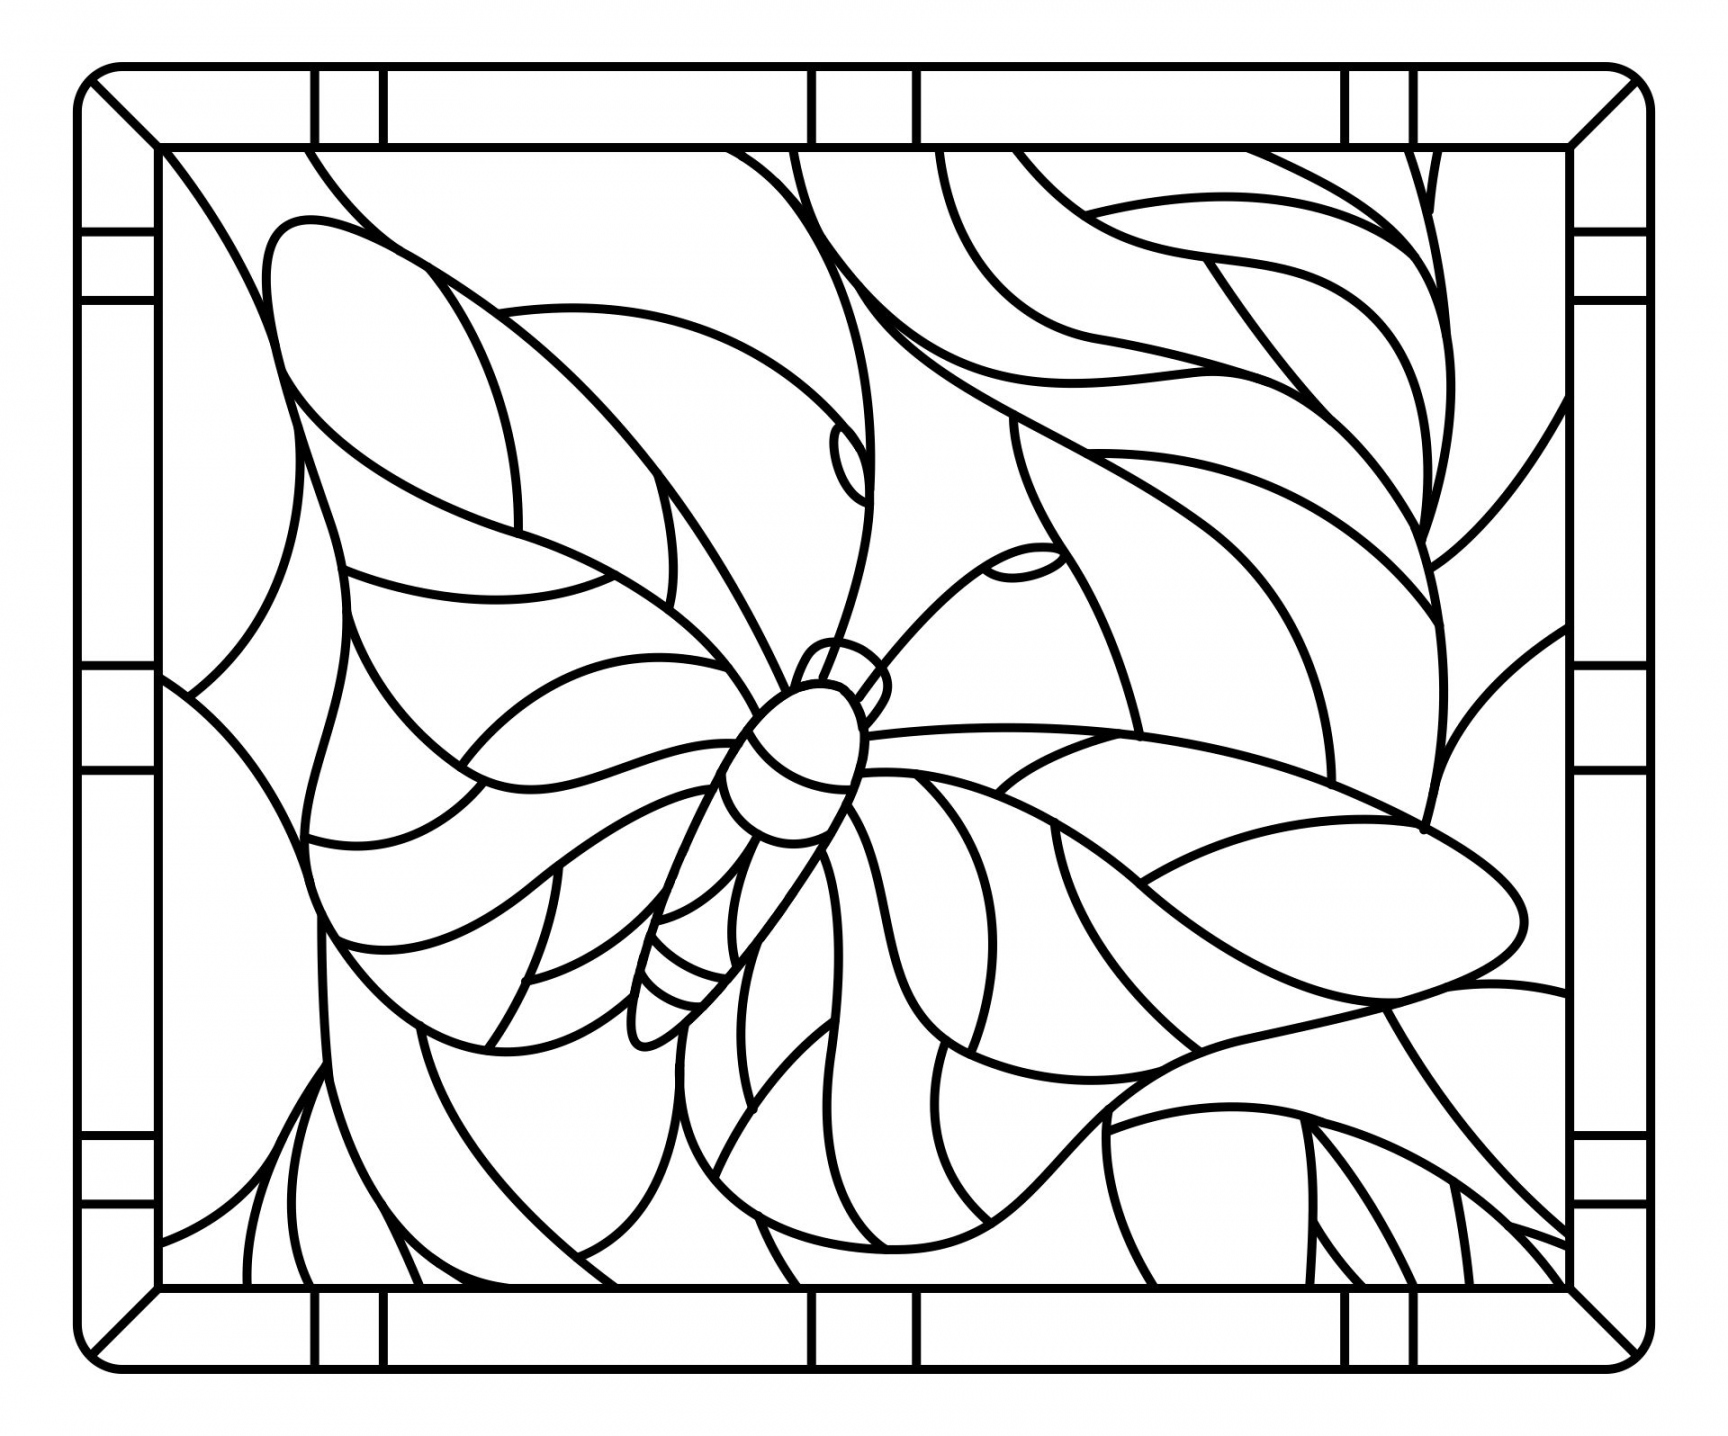  free Printable Stained Glass Patterns Halloween FREE Printable HQ